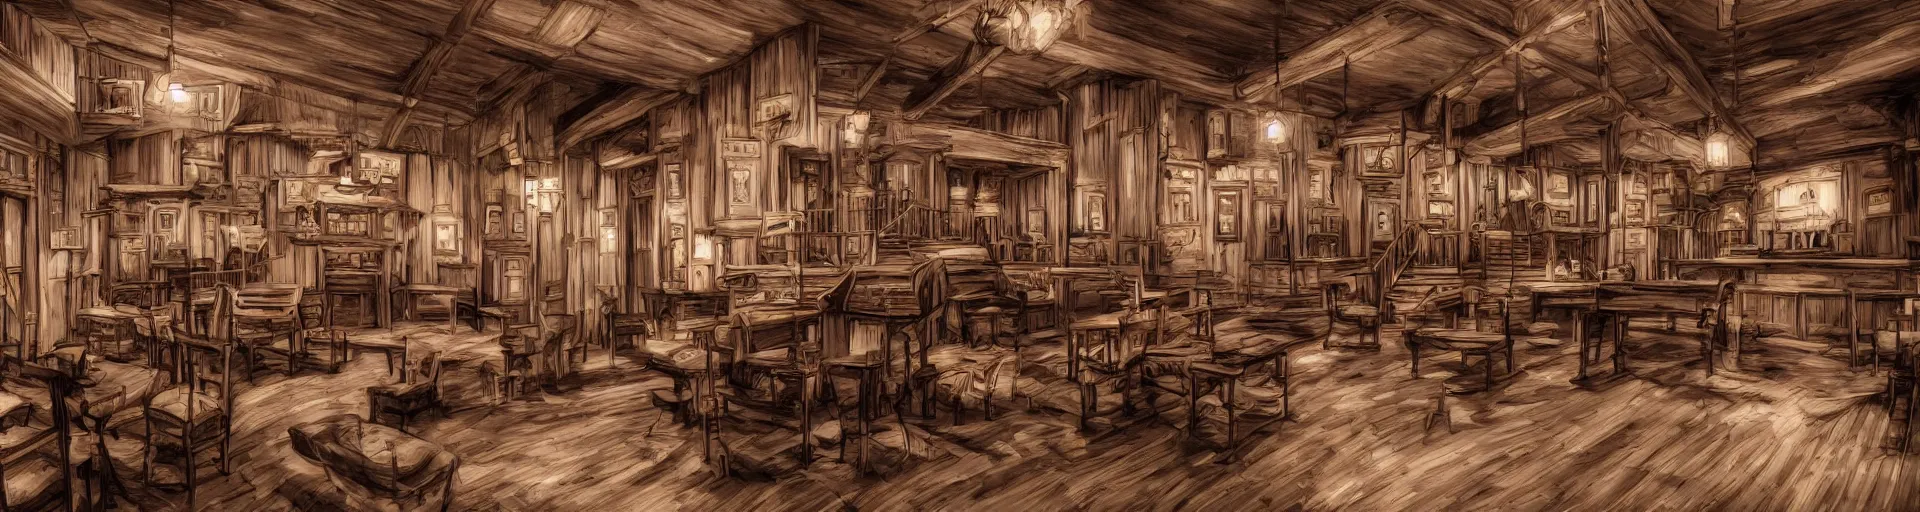 Image similar to Empty Old West Saloon at the break of day with a Grand Piano and Staircase, in the style of Studio Ghibli